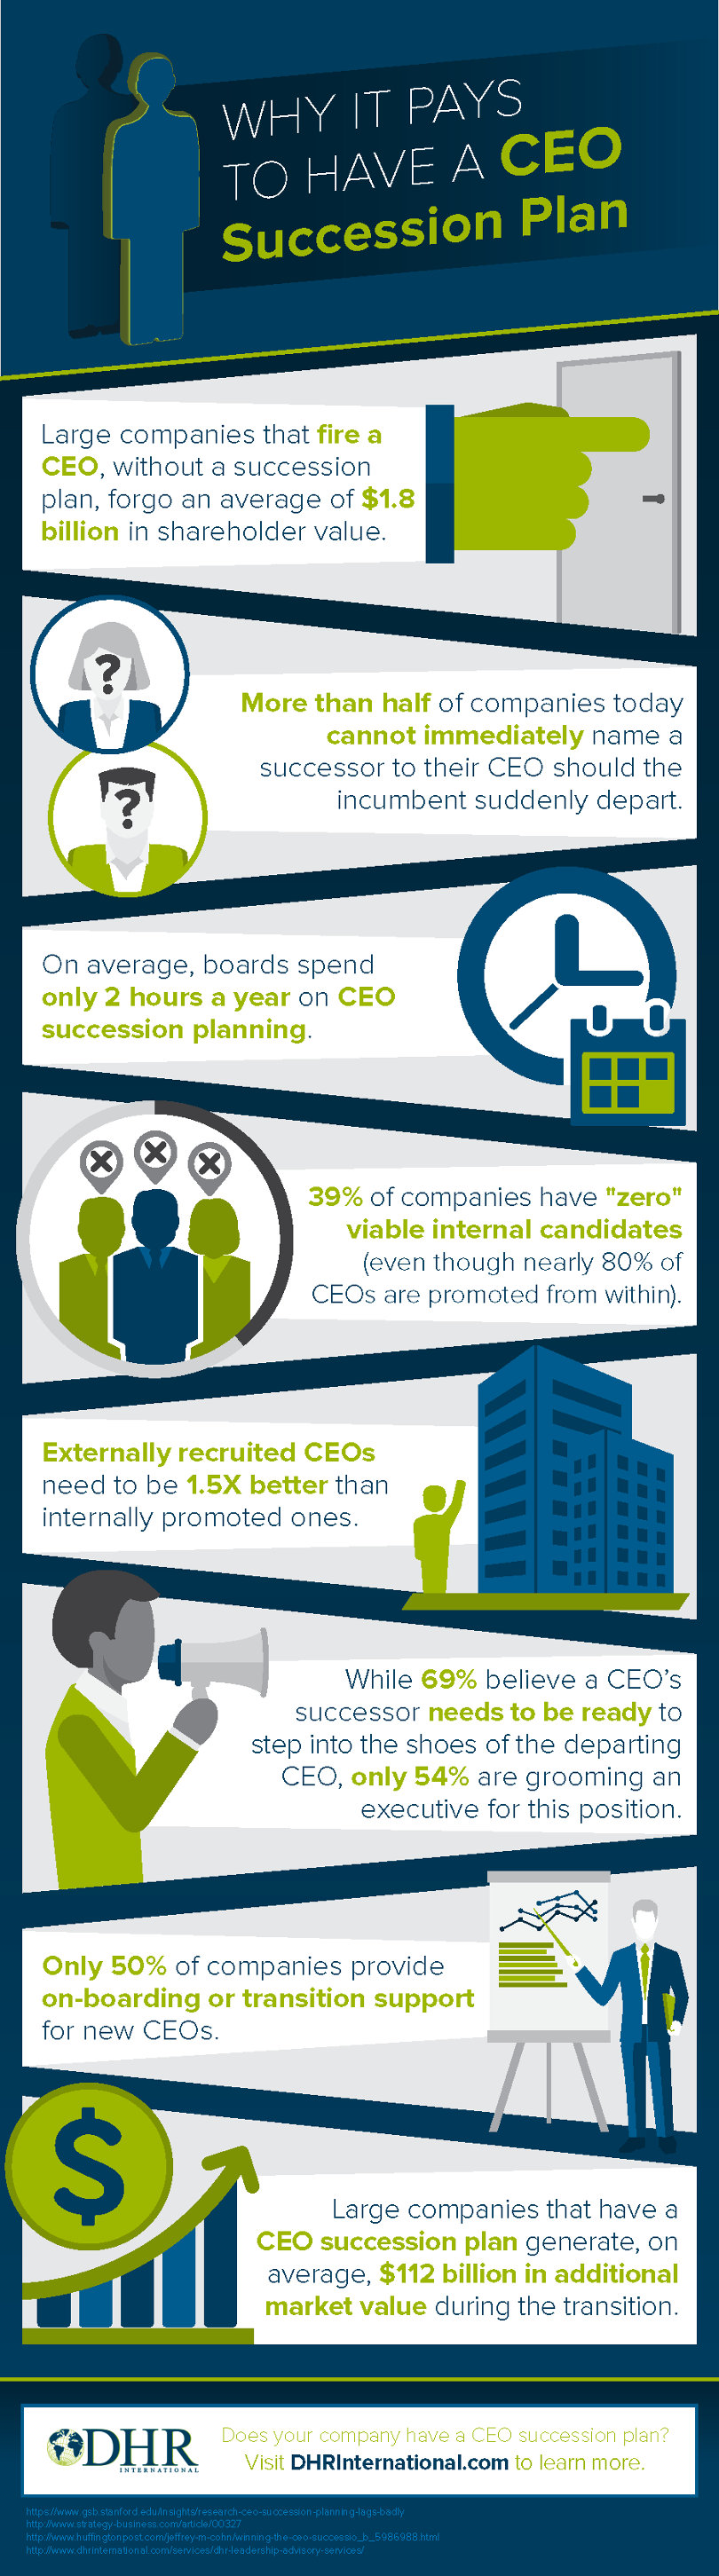 CEO succession plan infographic by DHR International